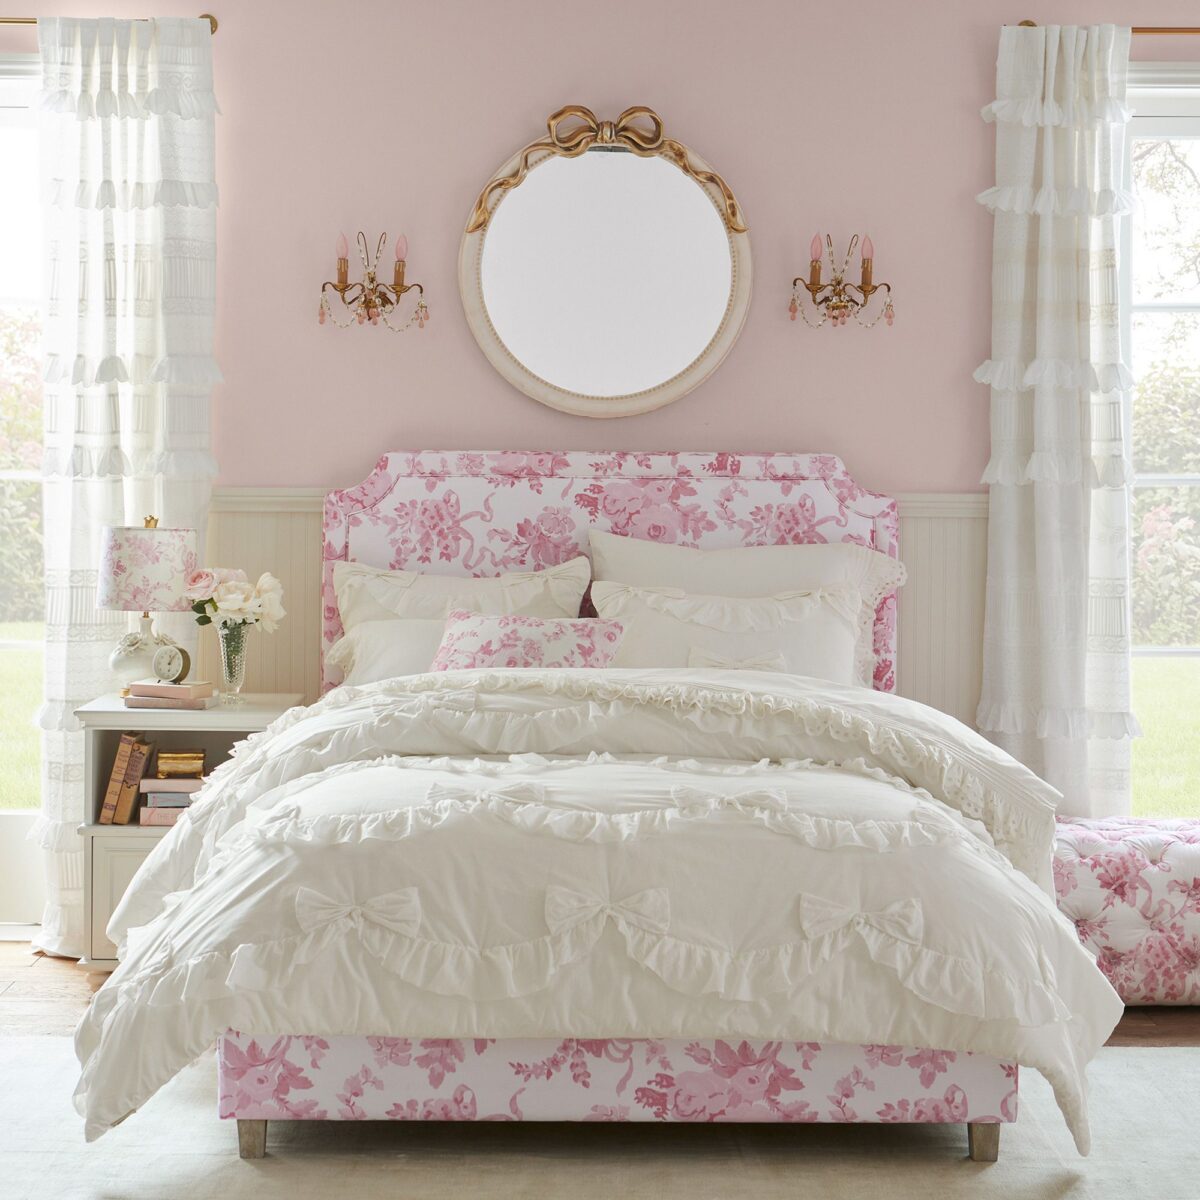 A pink and white tween girl bedroom with a ruffled bed.